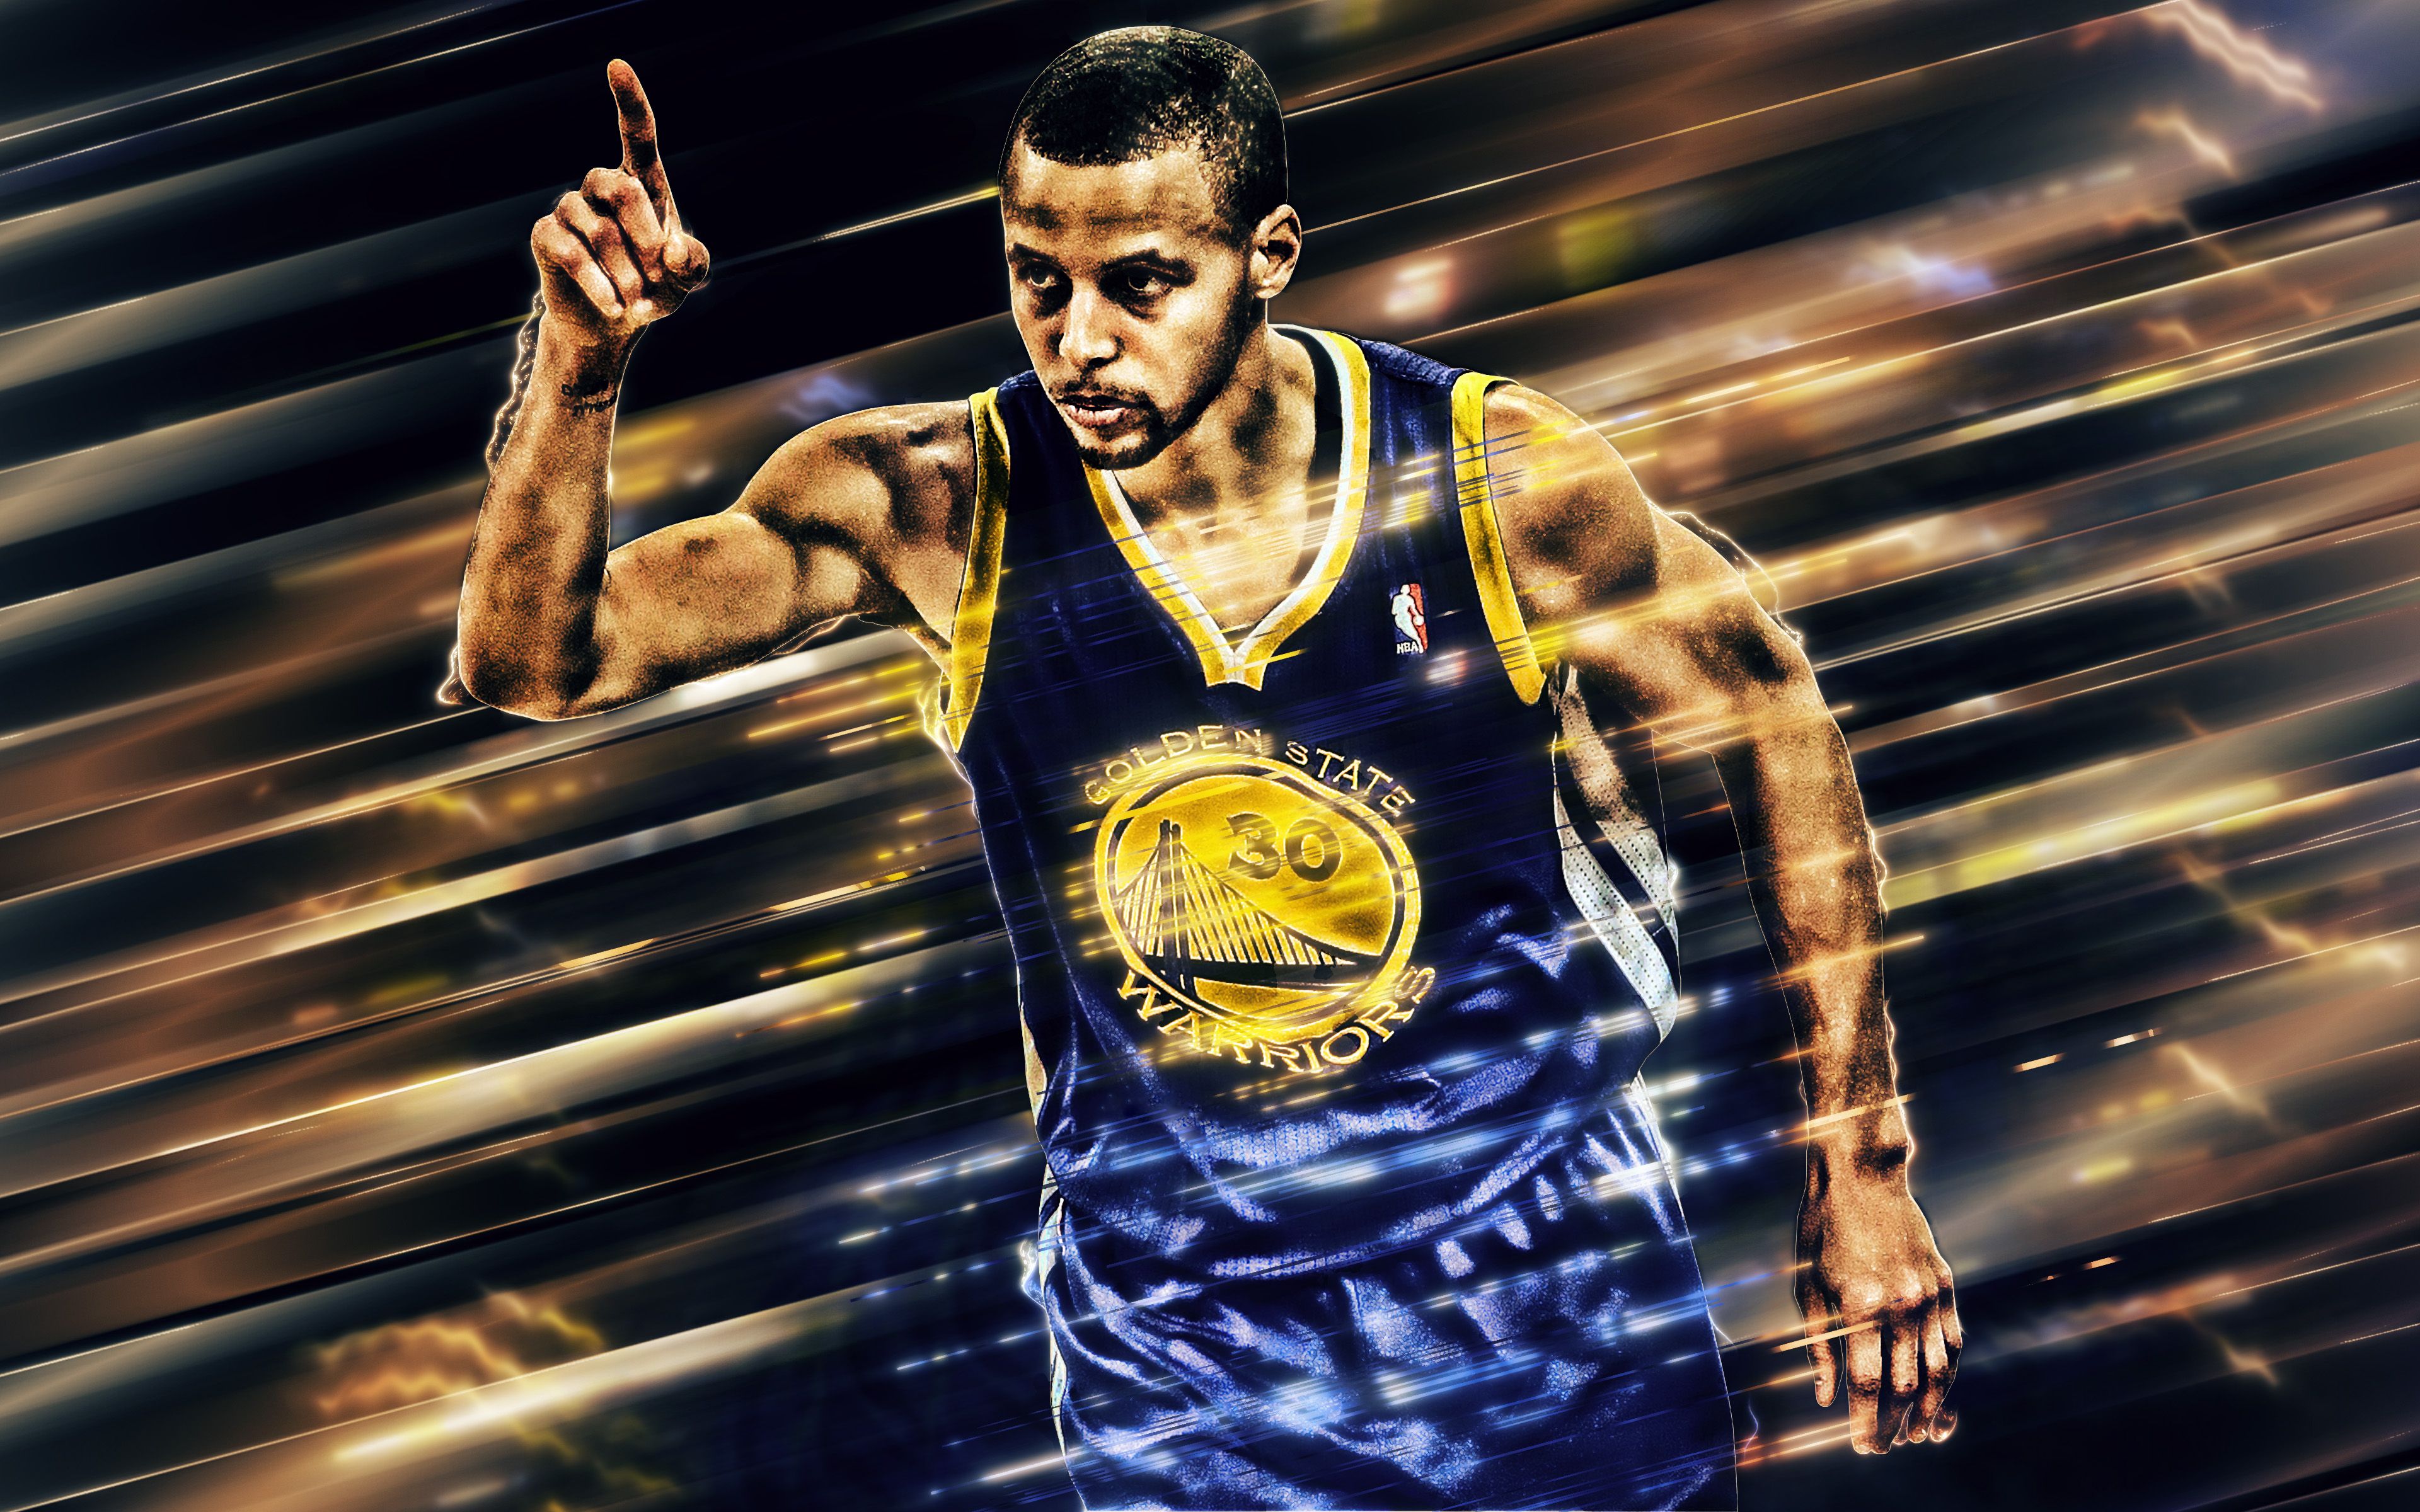 Curry Wallpapers